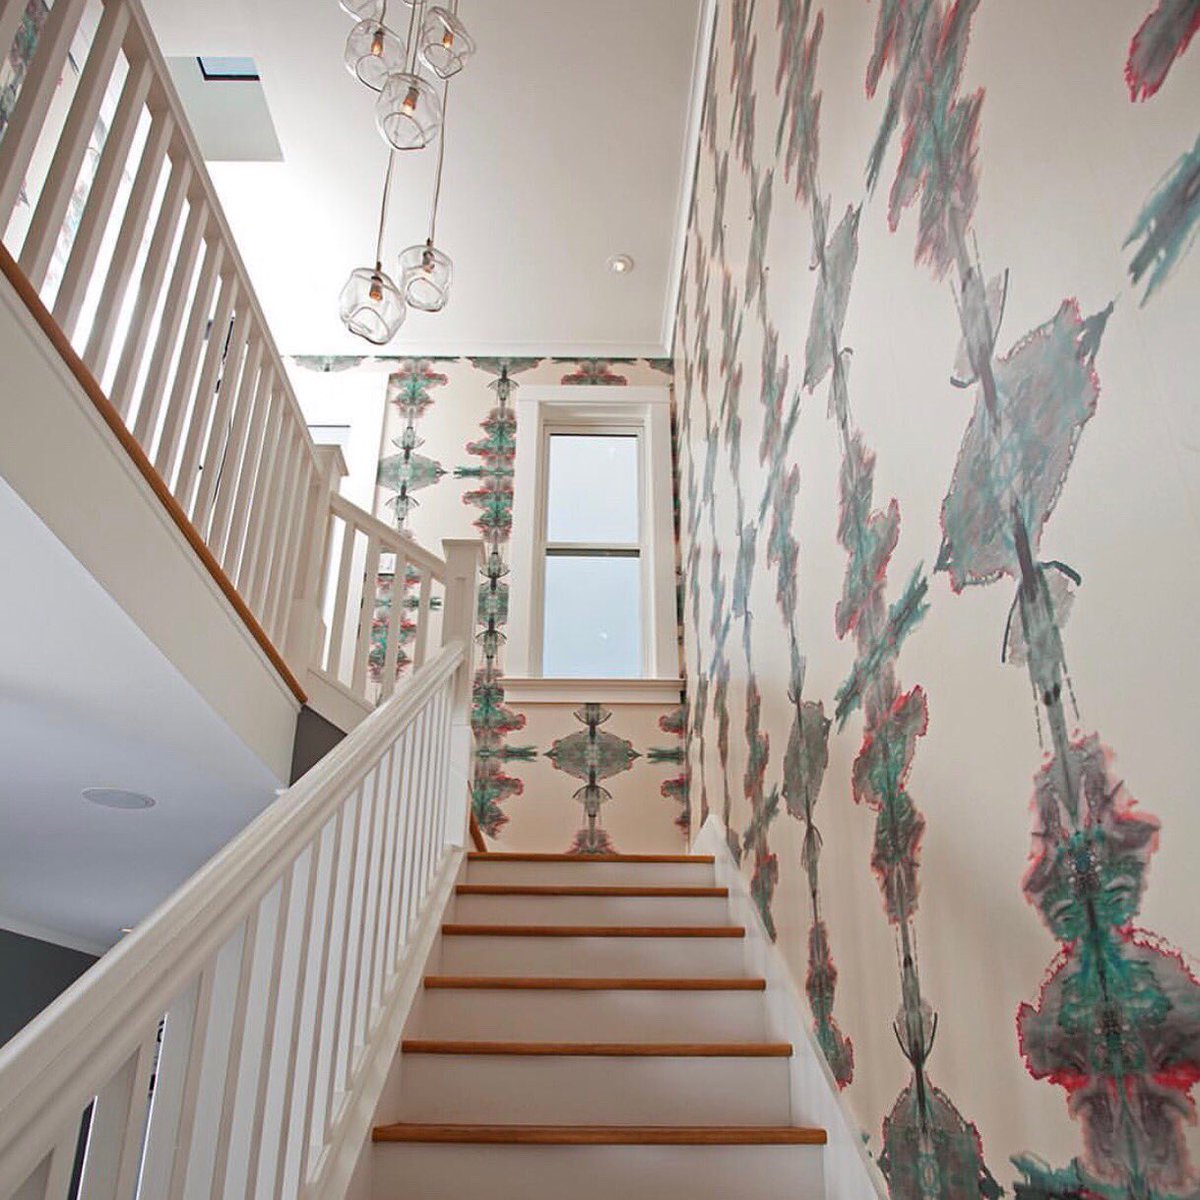 Anna French Savoy Cleo Vine Wallpaper on Staircase Wall  Transitional   Entrancefoyer